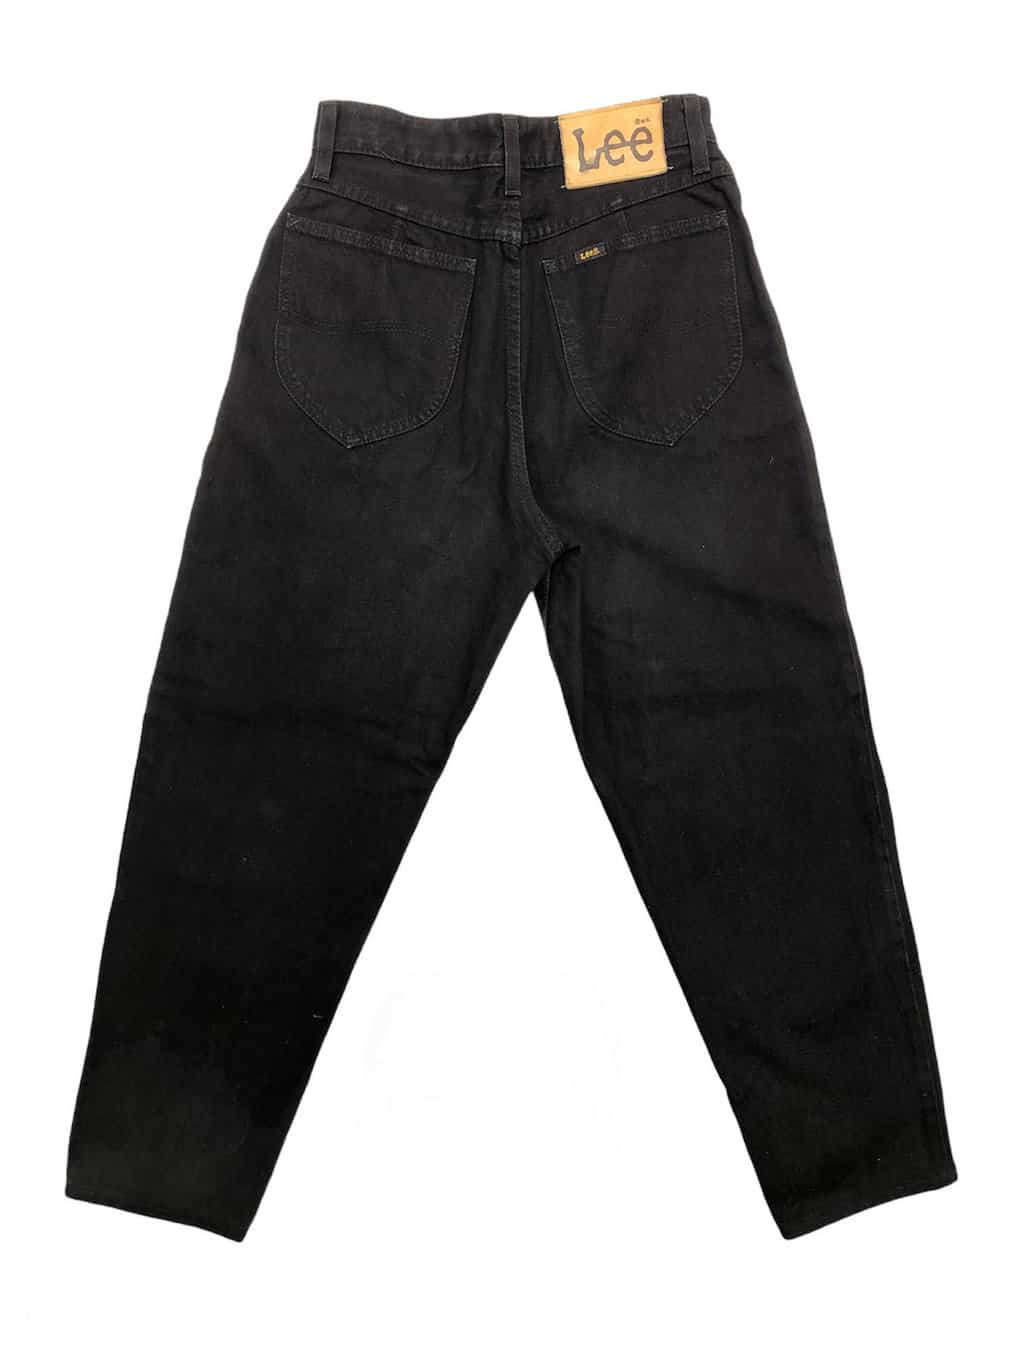 80s vintage Lee 'Hollywood' mom jeans in black with tapered leg